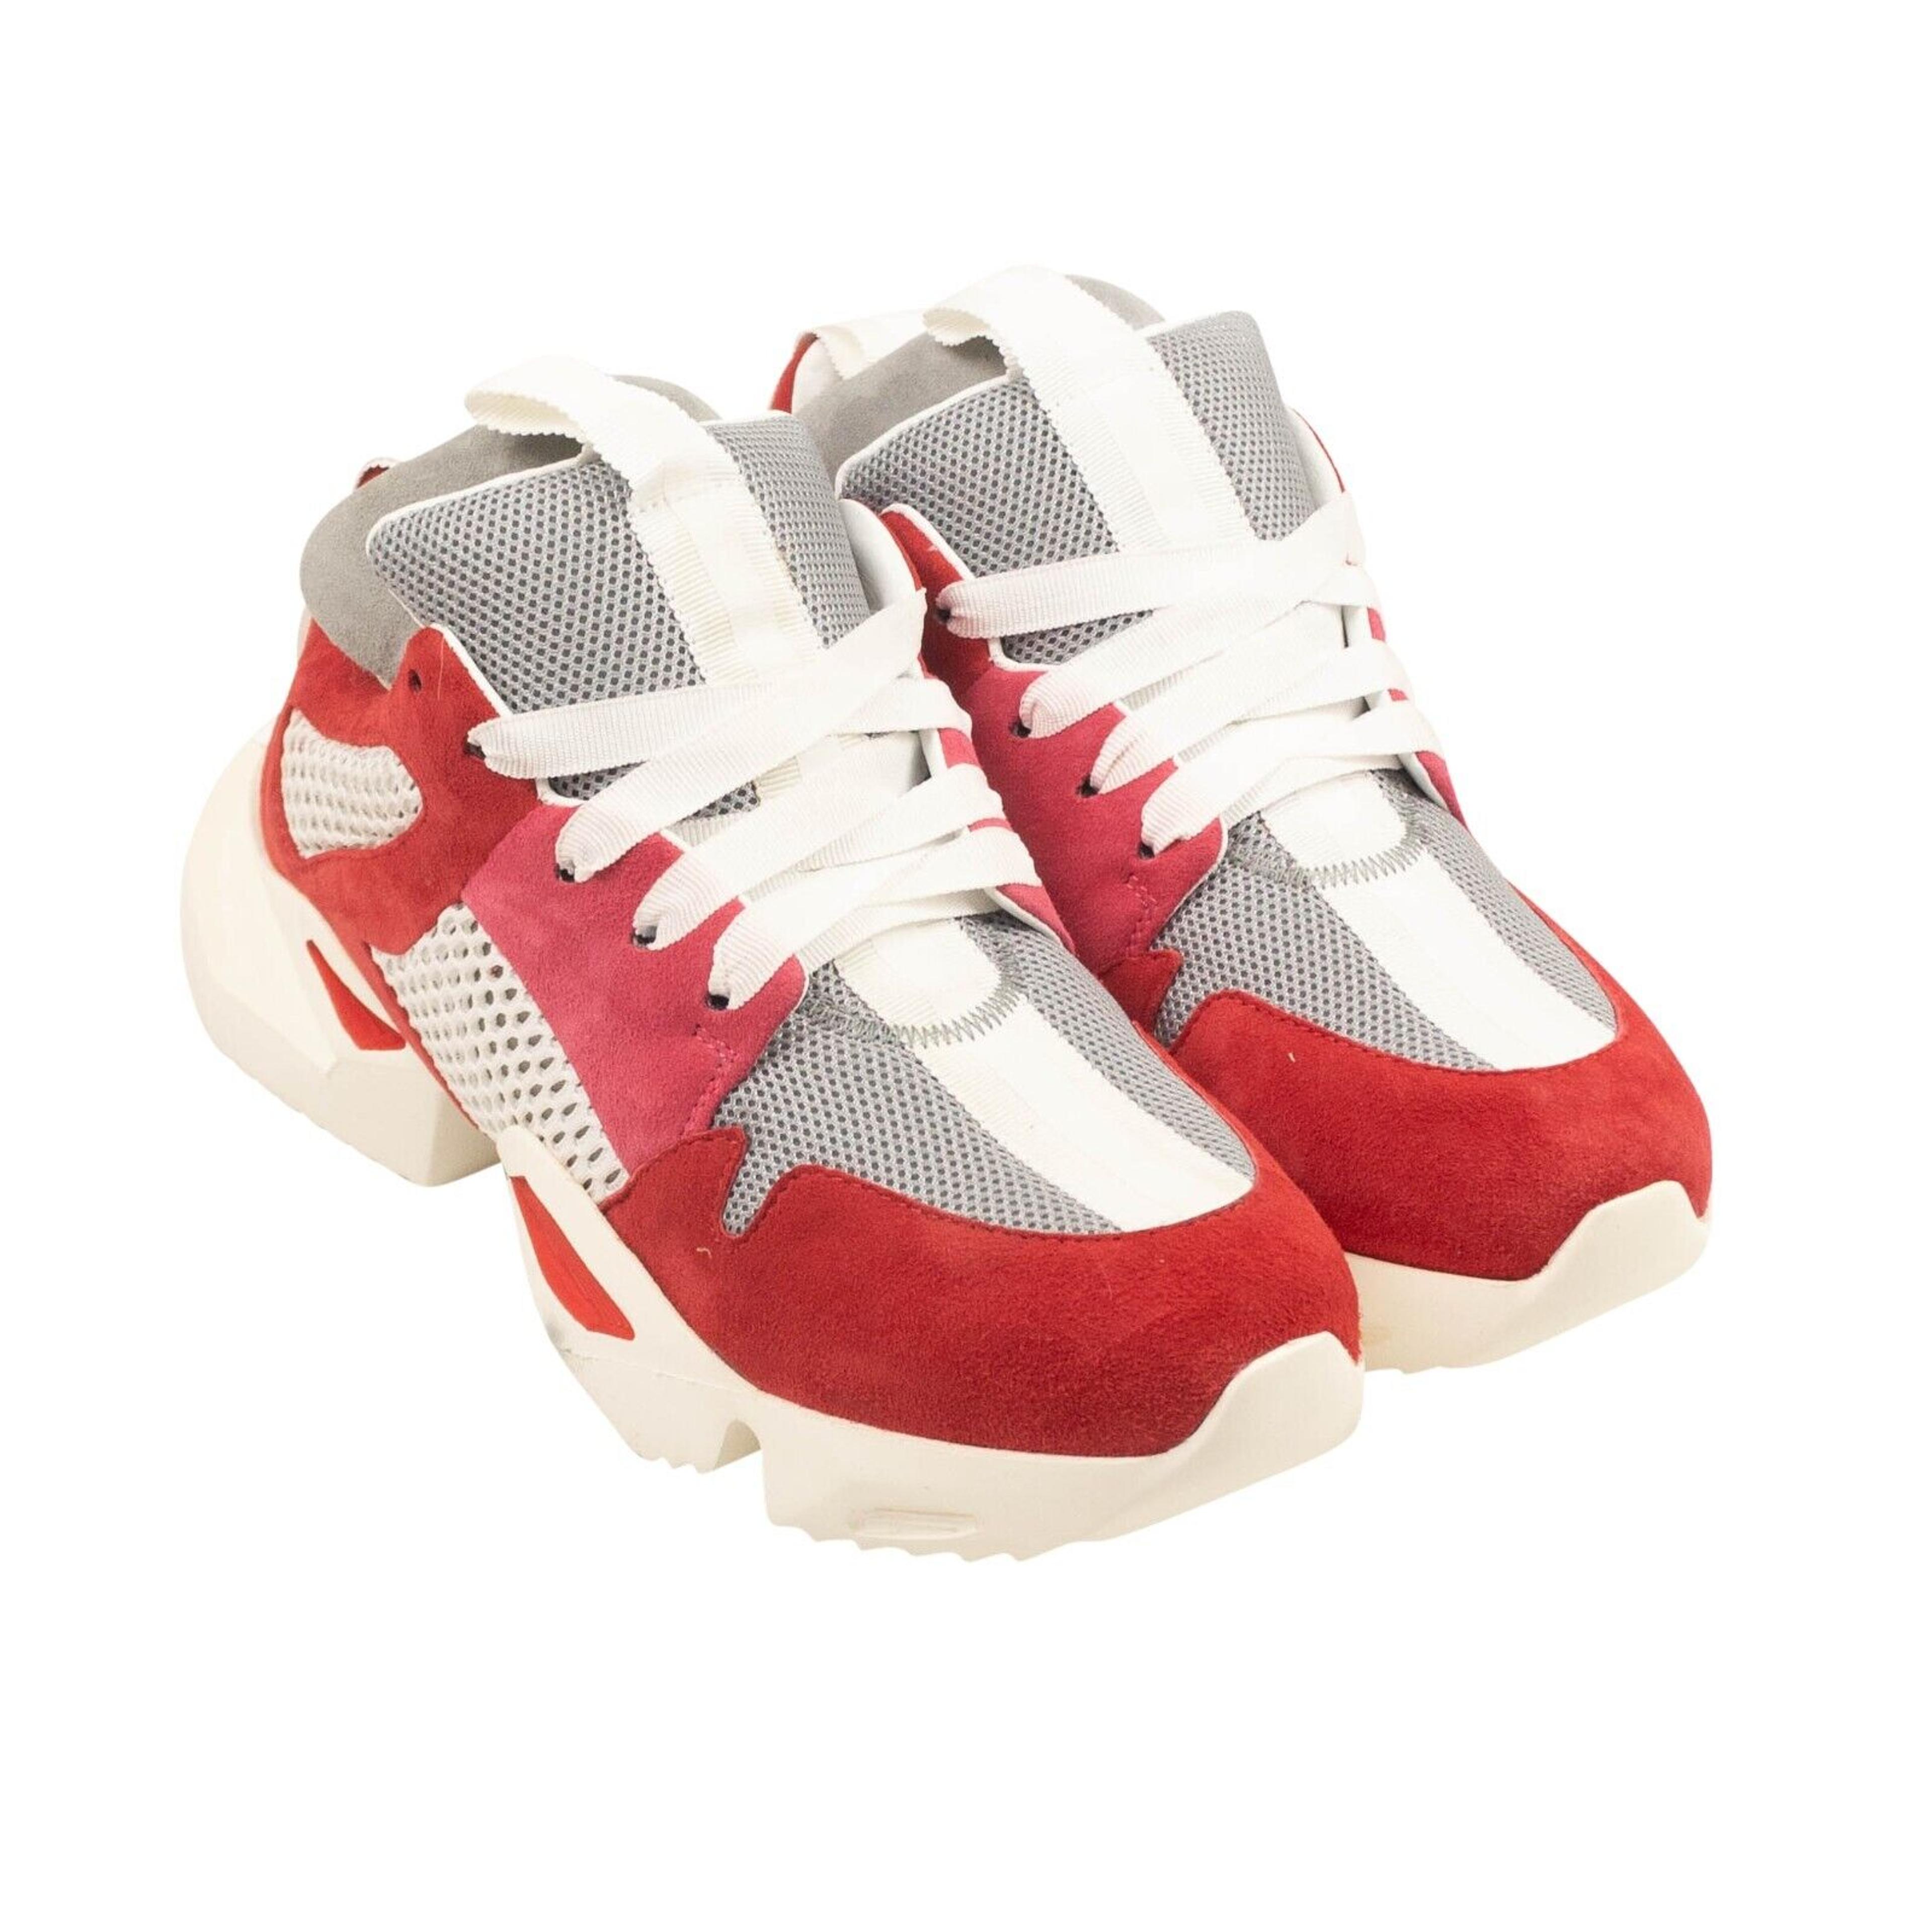 Alternate View 3 of Unravel Project Mesh Suede Sneakers - Red/Pink/Gray